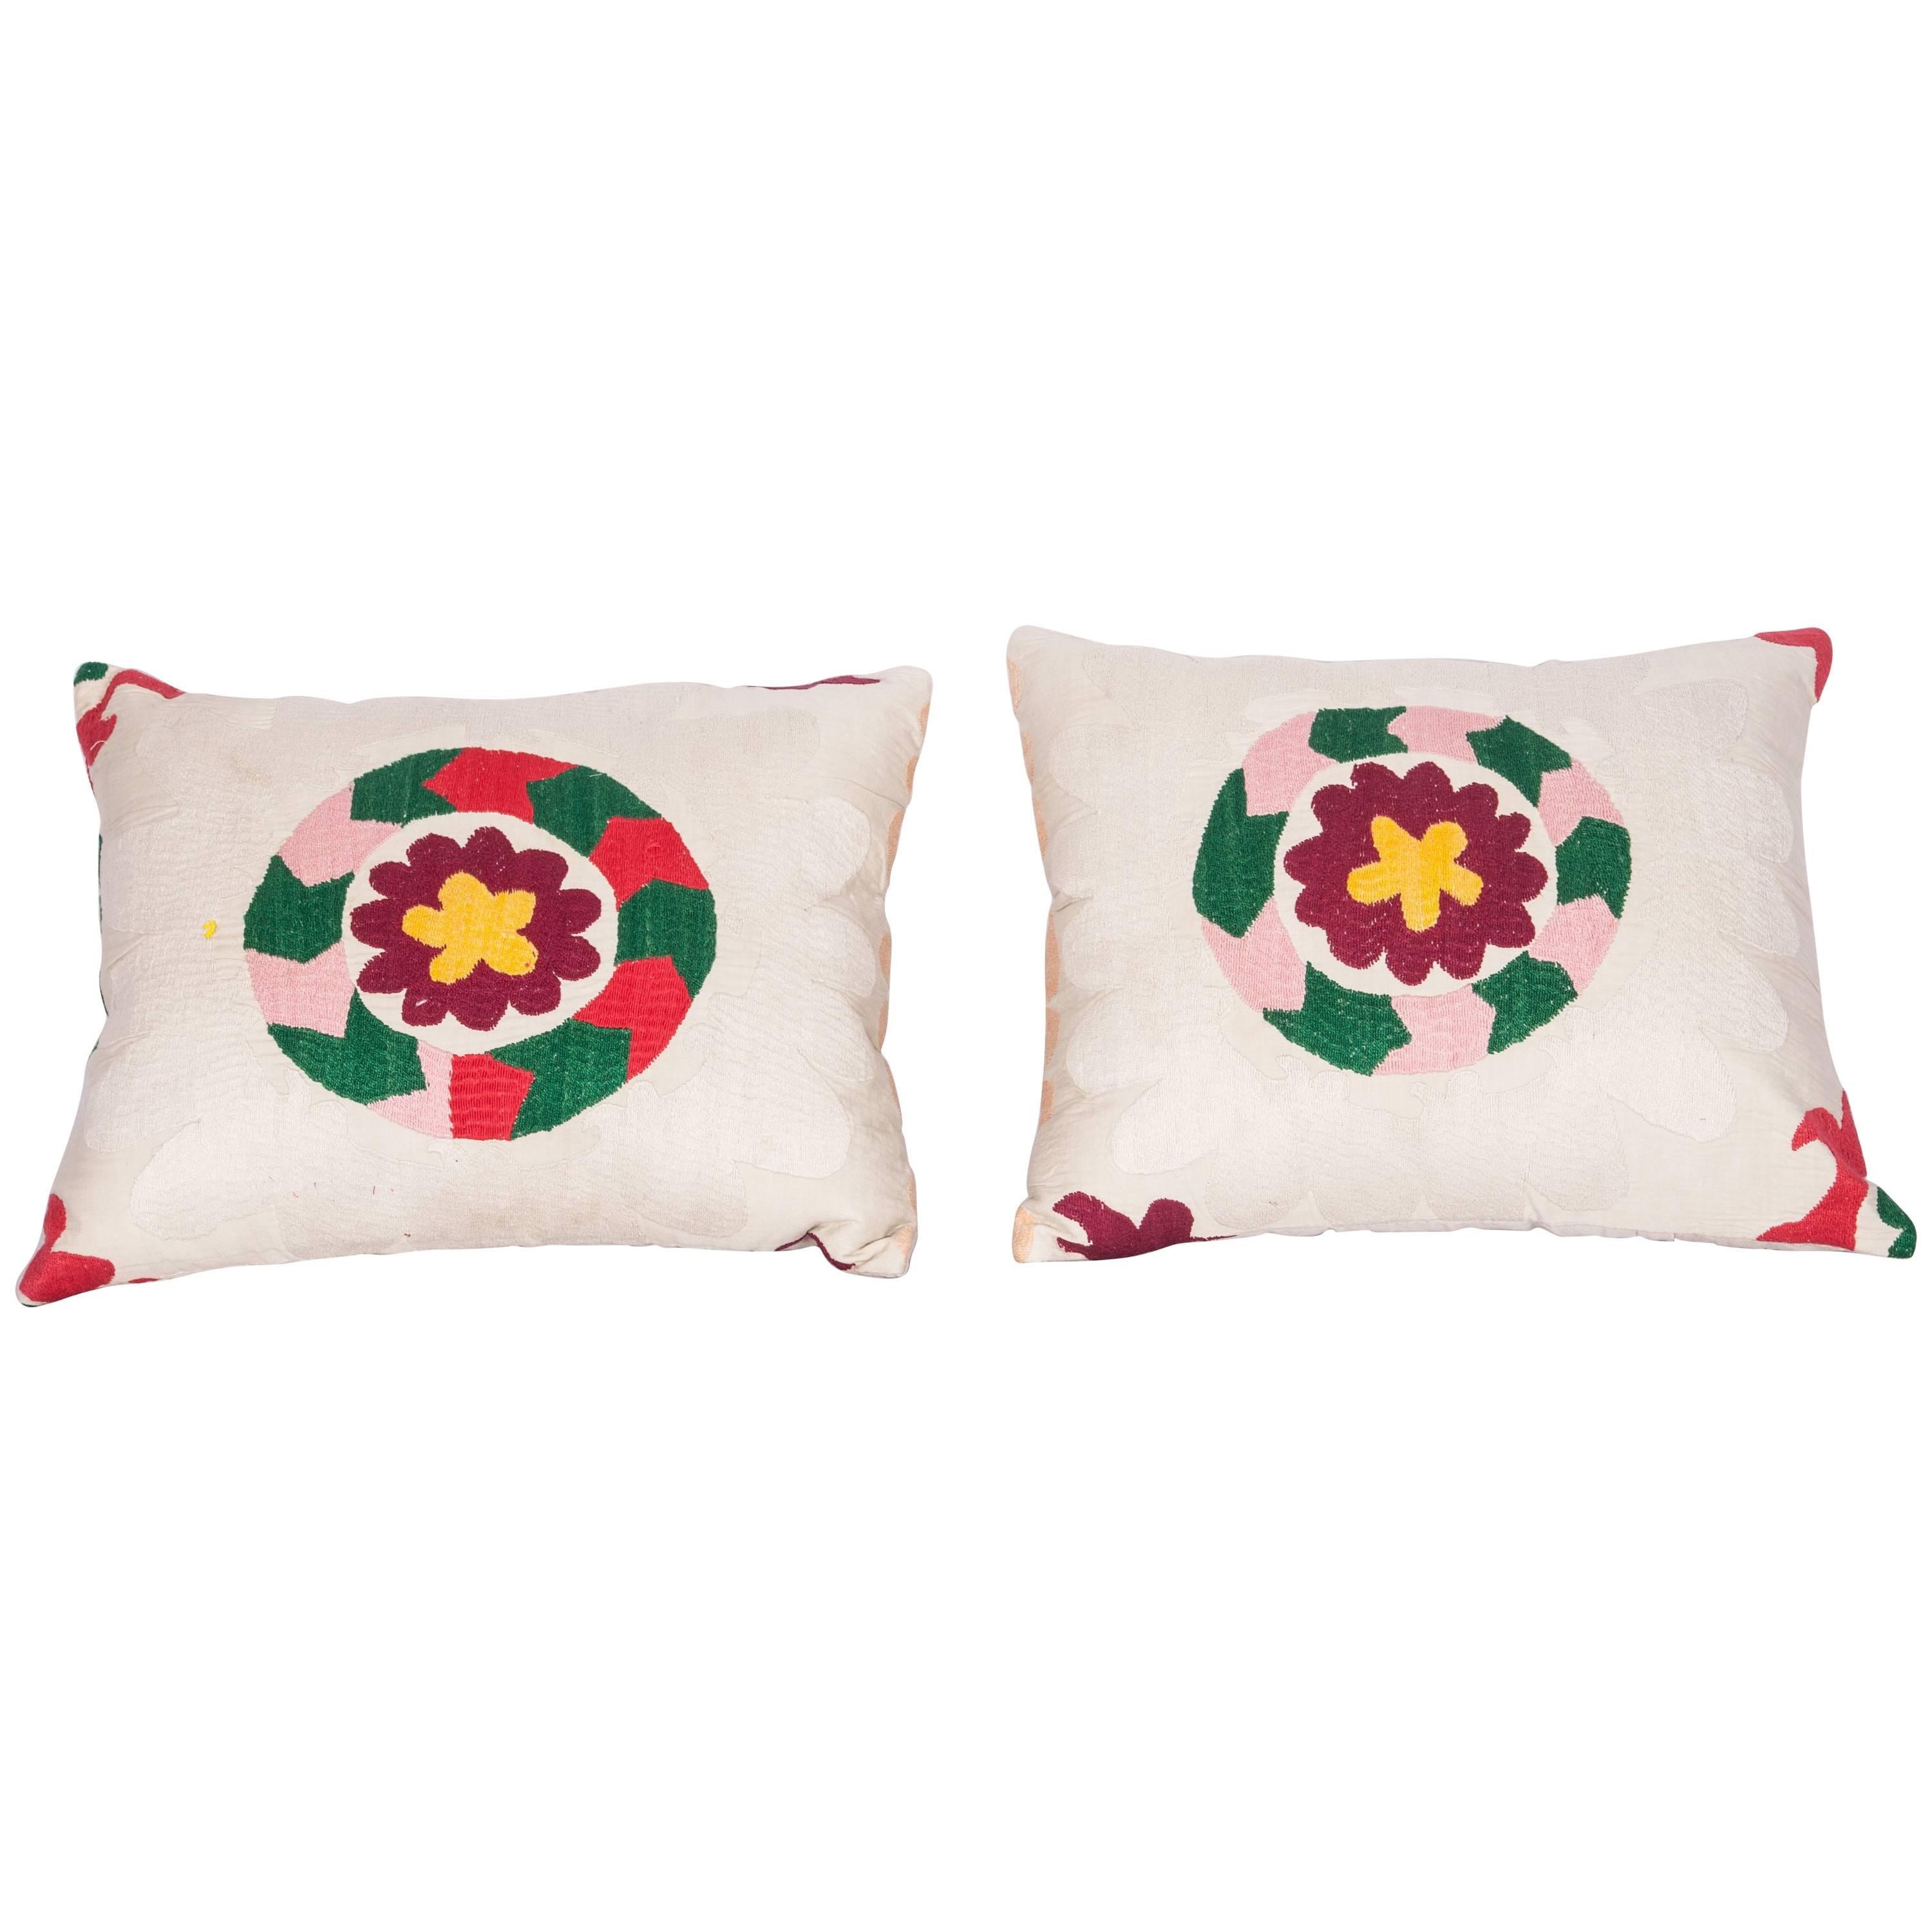 Pillow Cases Fashioned Out of a Vintage Tajik Suzani